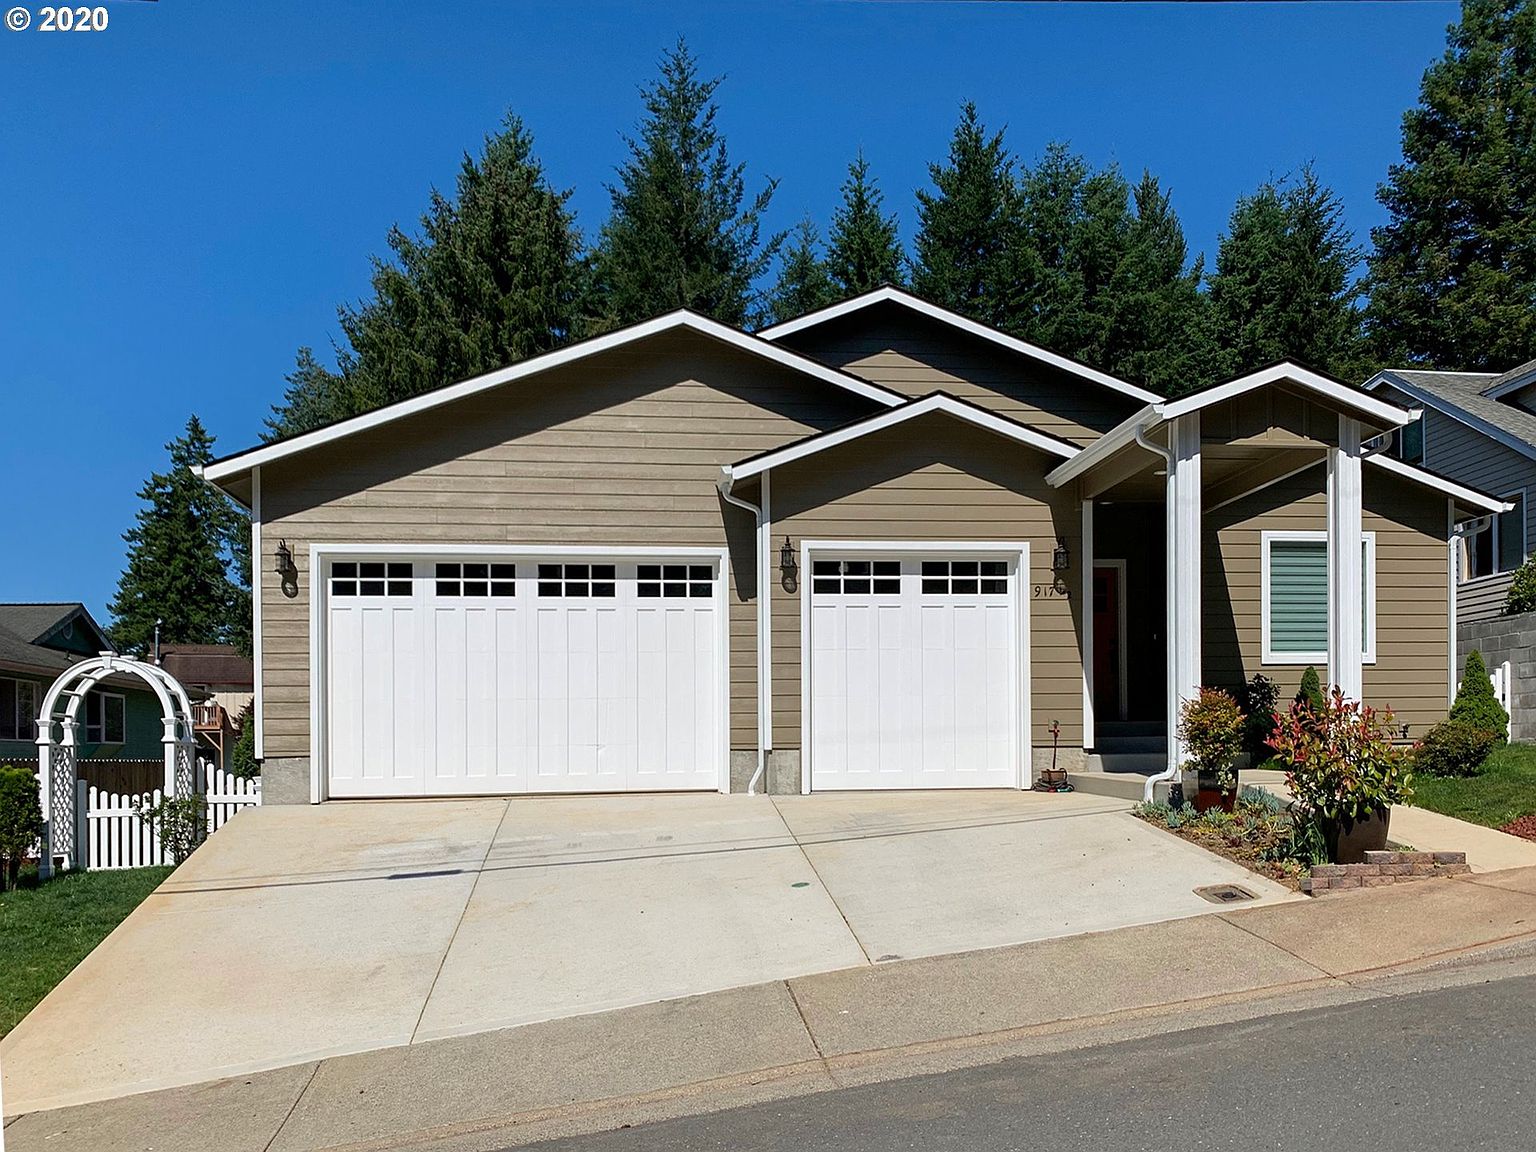 917.5 7th St, Brookings, OR 97415 | Zillow